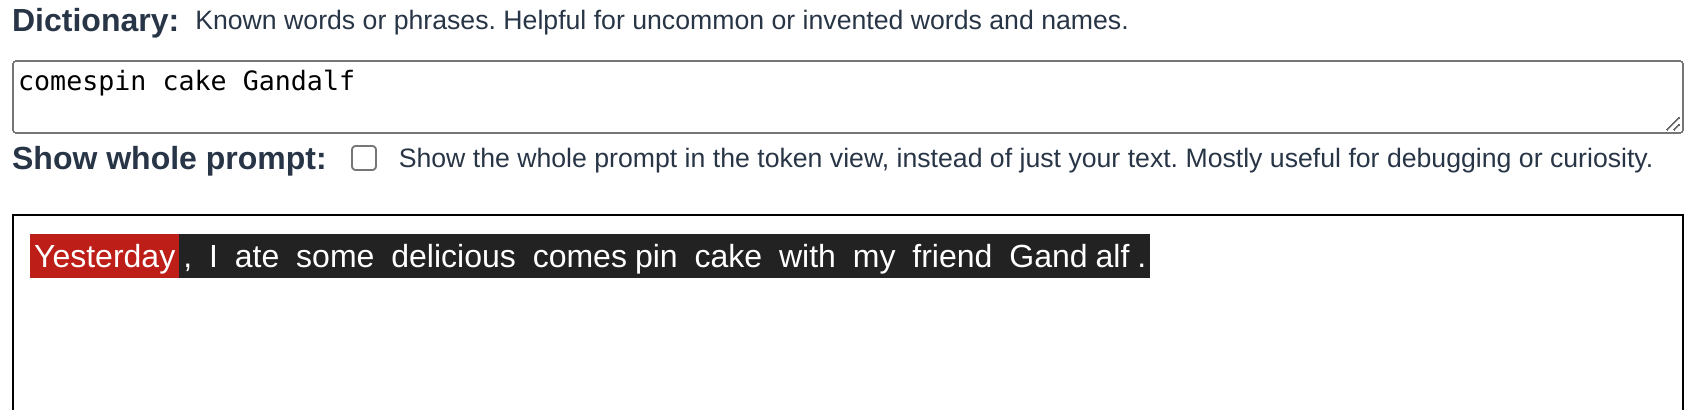 Adding "comespin cake Gandalf" as a dictionary fixes the flags, except for the false positive at the beginning of the input.